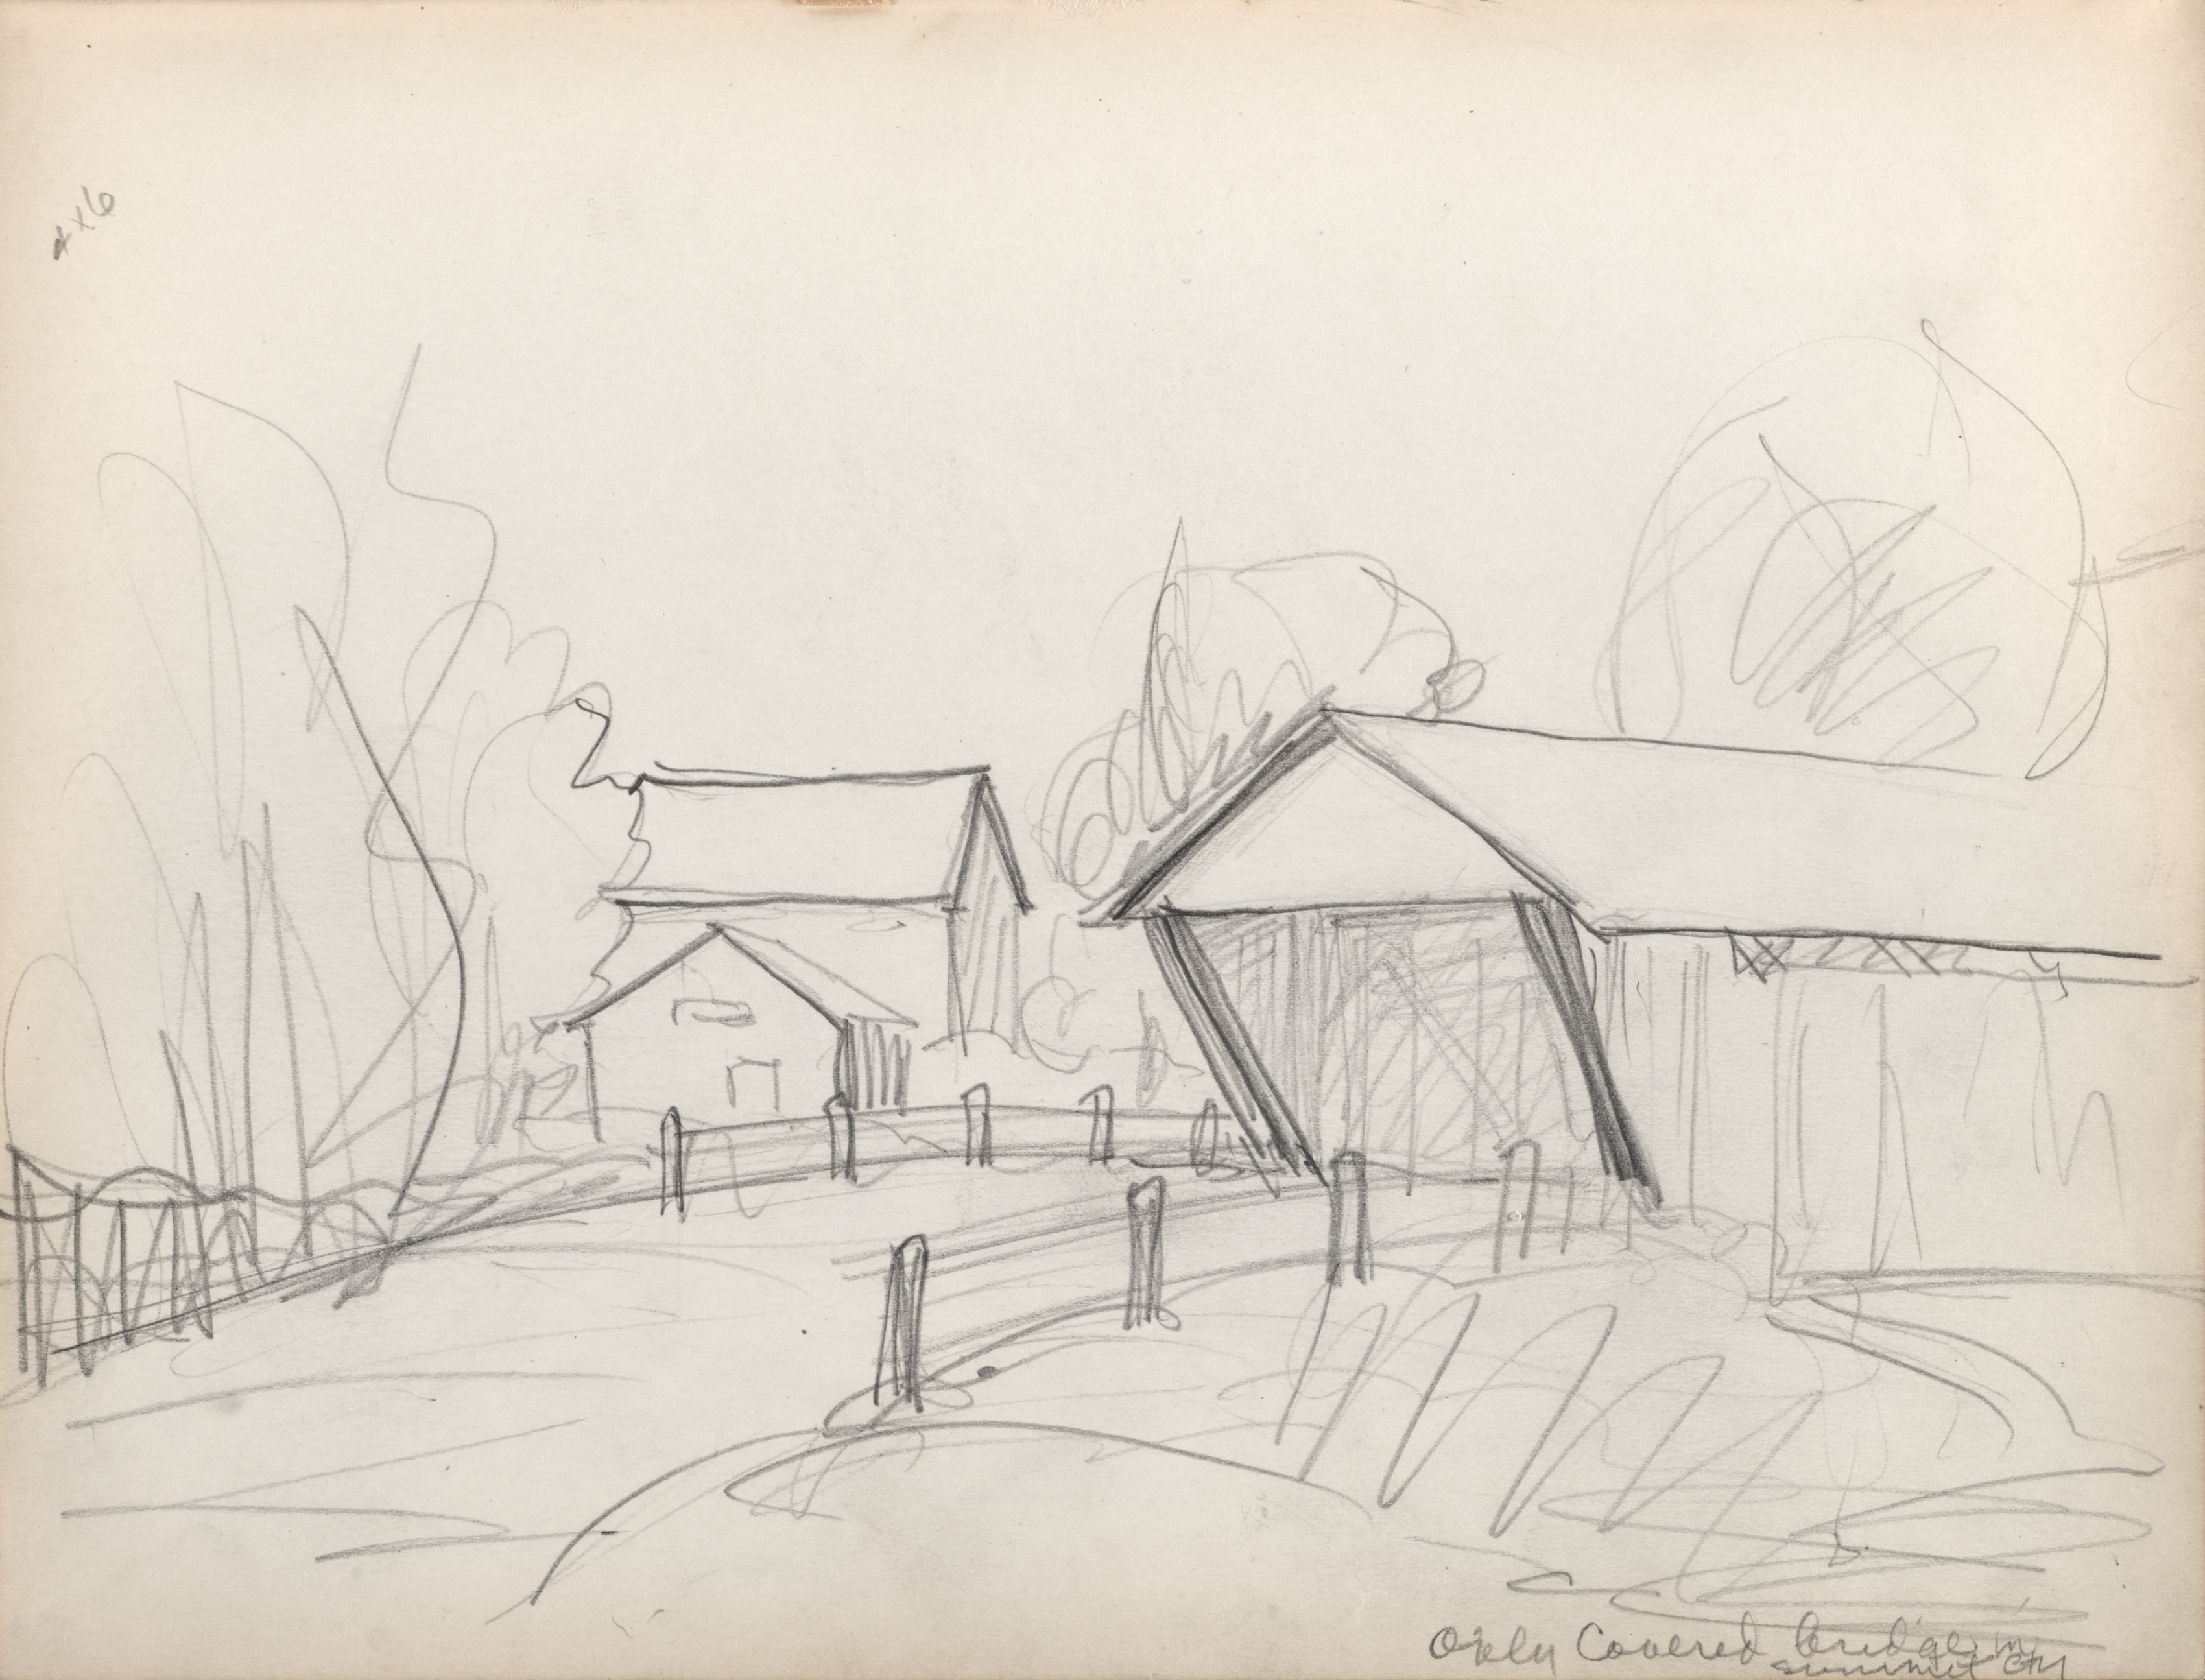 "Only covered bridge in Summit City," from Sketchbook No.2, p. 97